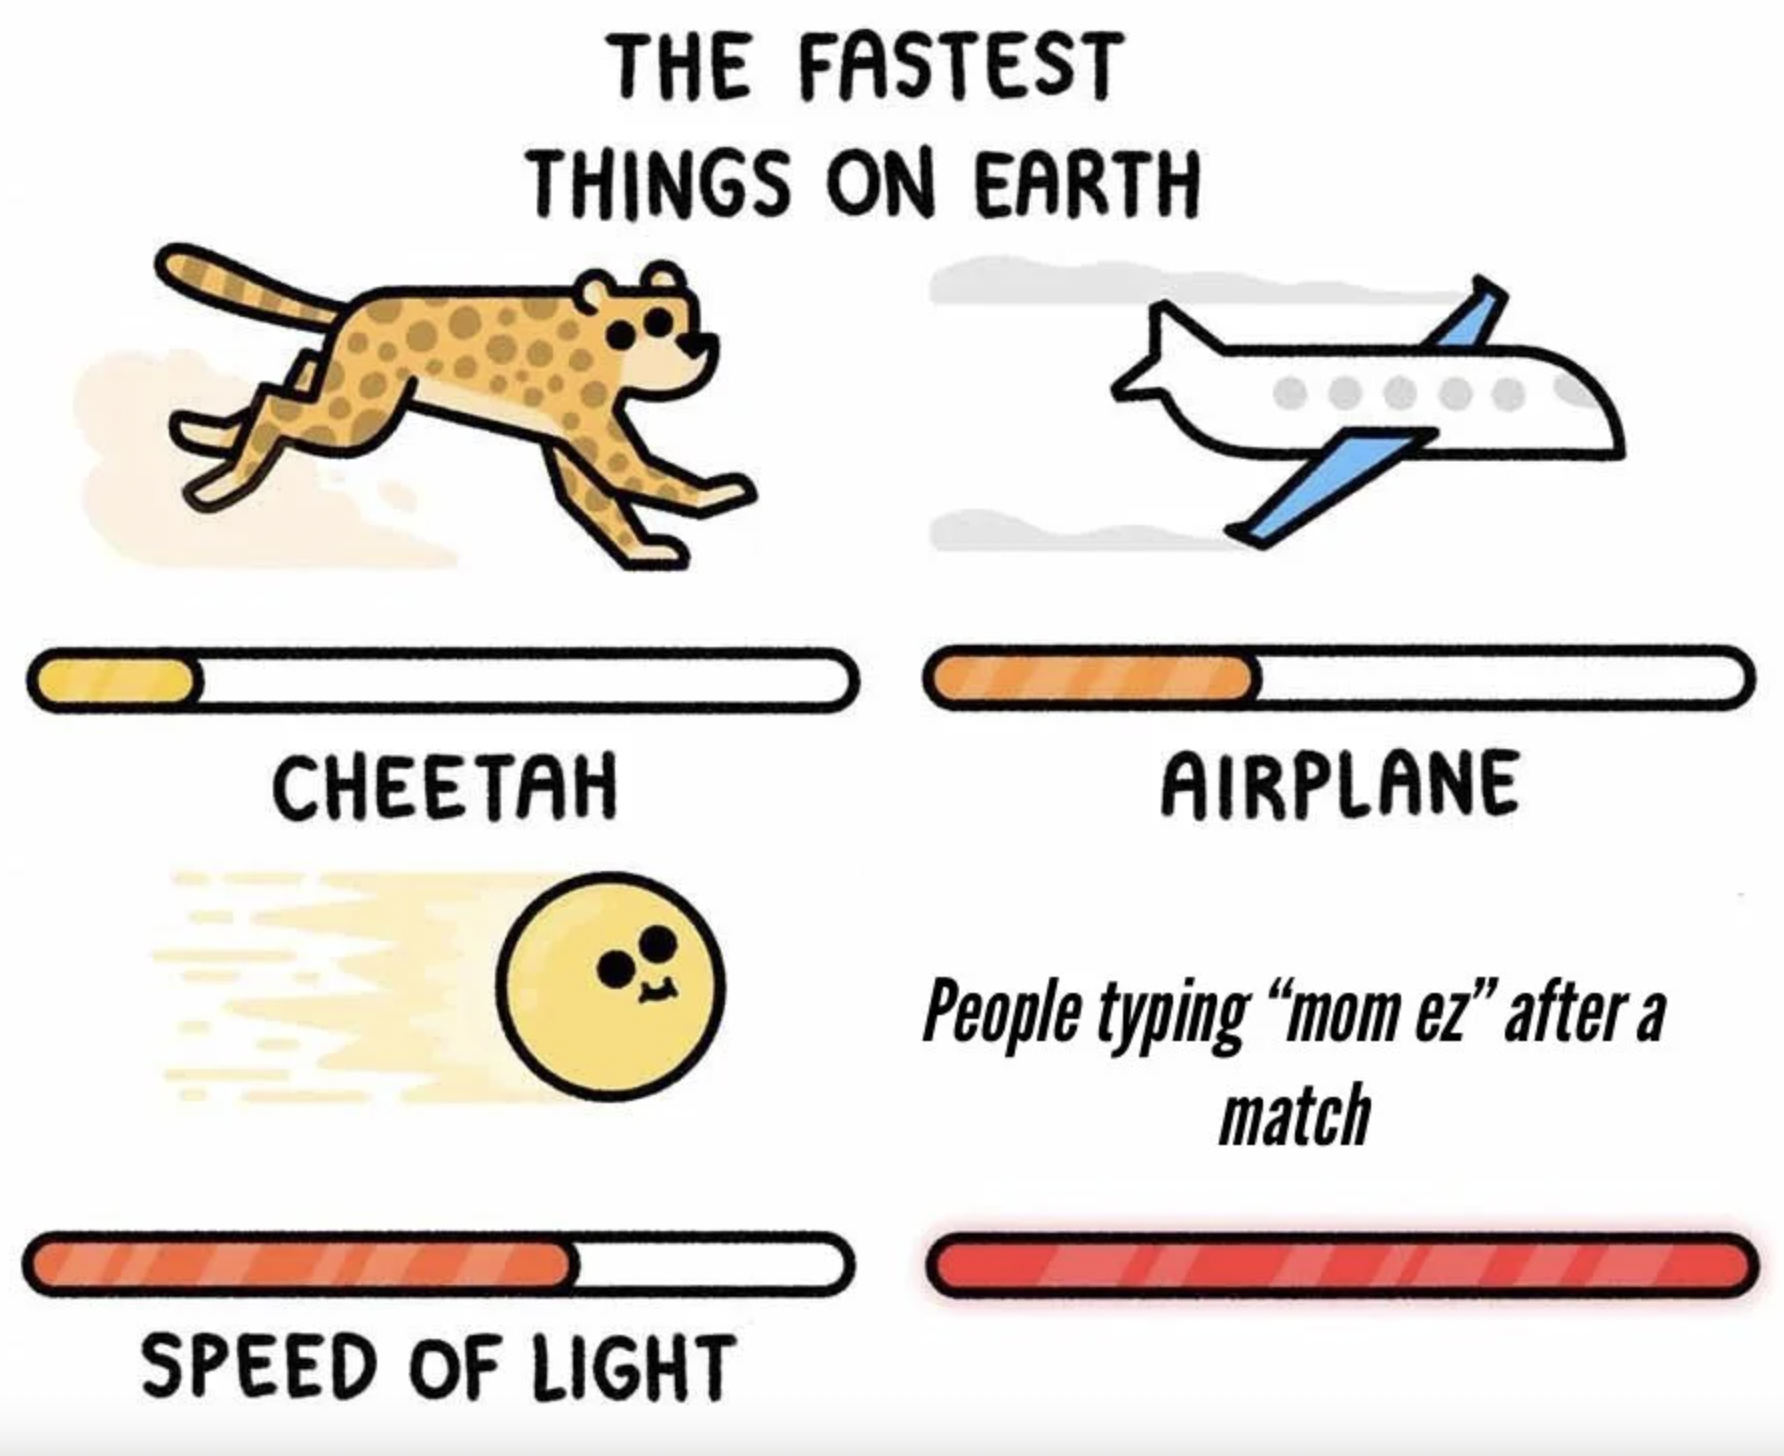 Gaming Memes - fastest things on earth - The Fastest Things On Earth 53 Cheetah Speed Of Light ..... Airplane People typing